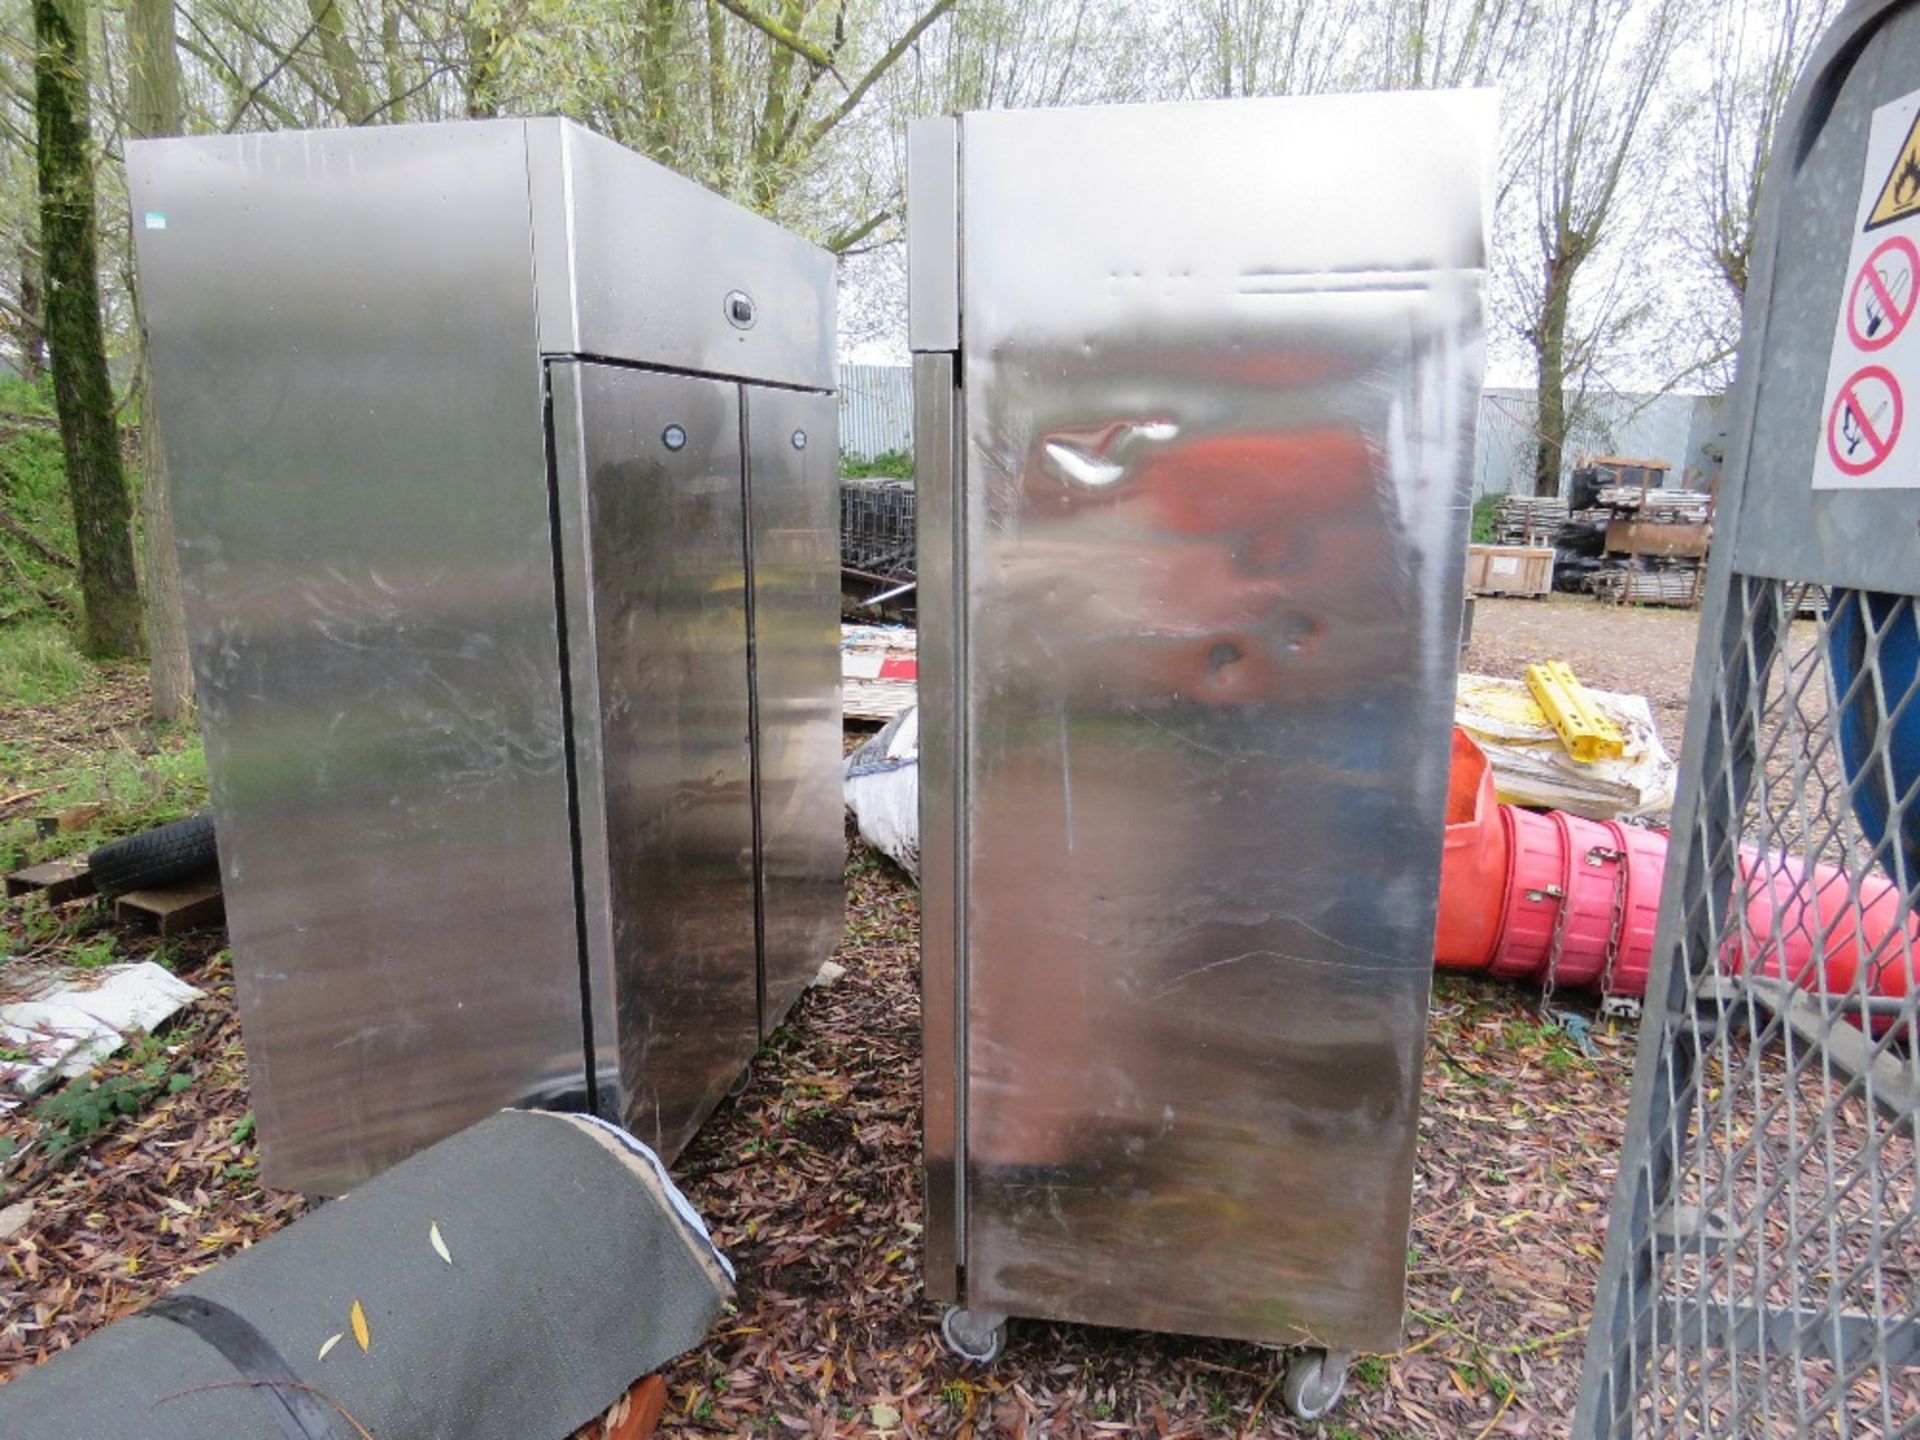 2 X LARGE CAPACITY CATERING FRIDGES DIRECT FROM CAFE SITE RE-DEVELOPMENT. WORKING WHEN RECENTLY REM - Image 6 of 6